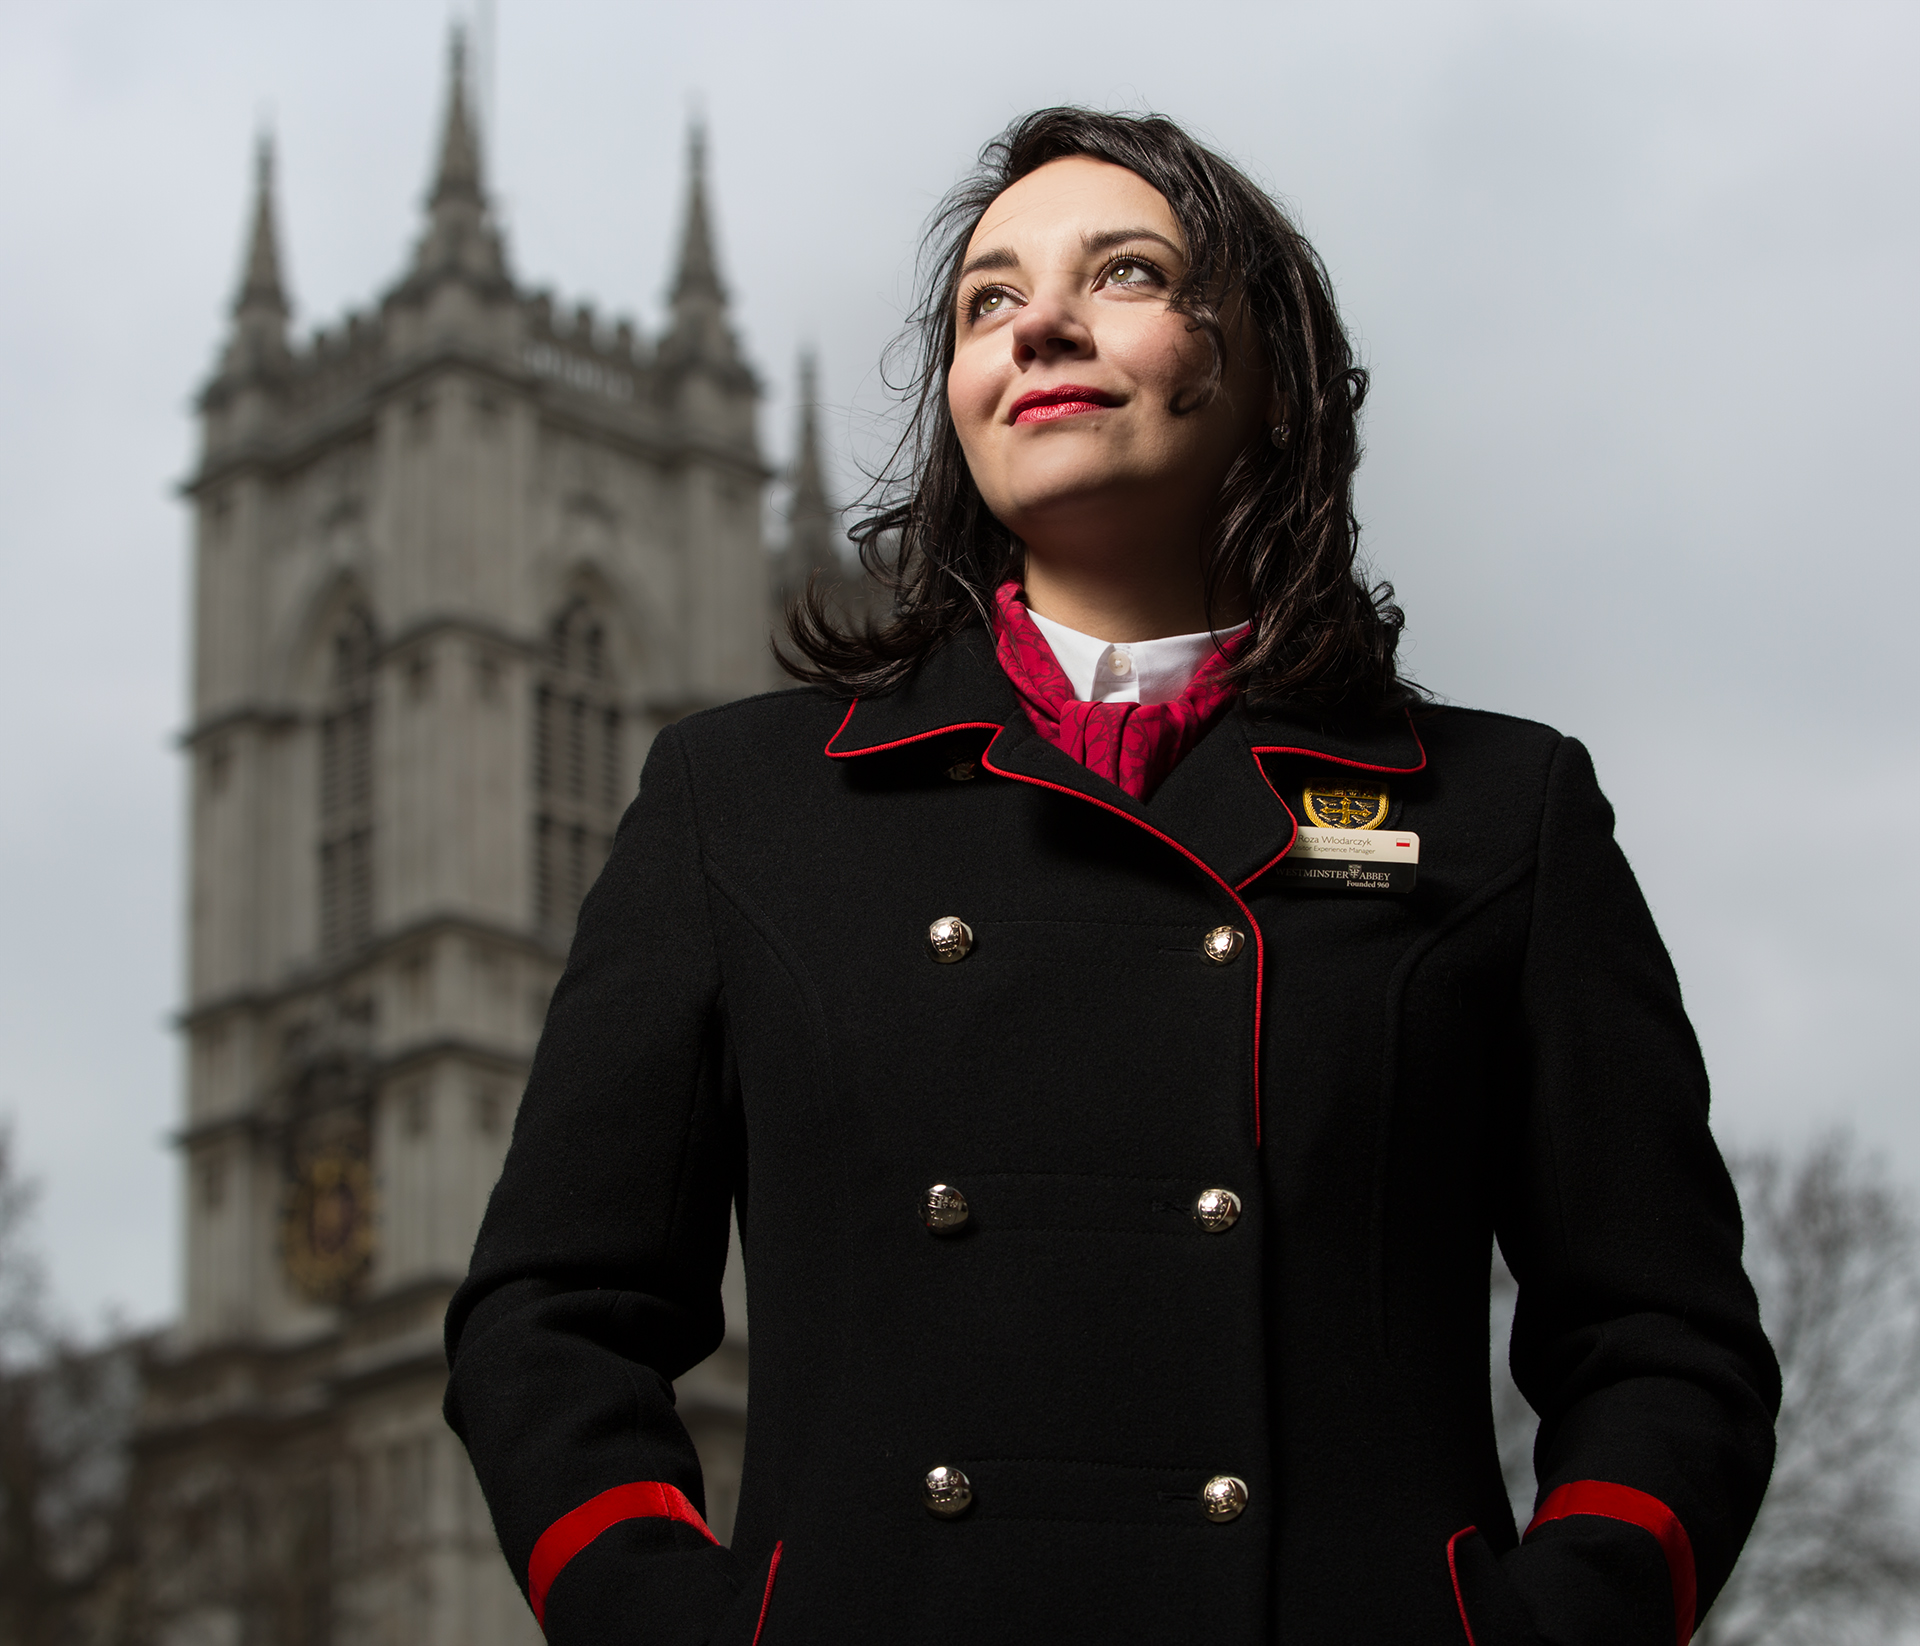 Róża Włodarczyk / Visitor Experience Manager at Westminister Abbey. 